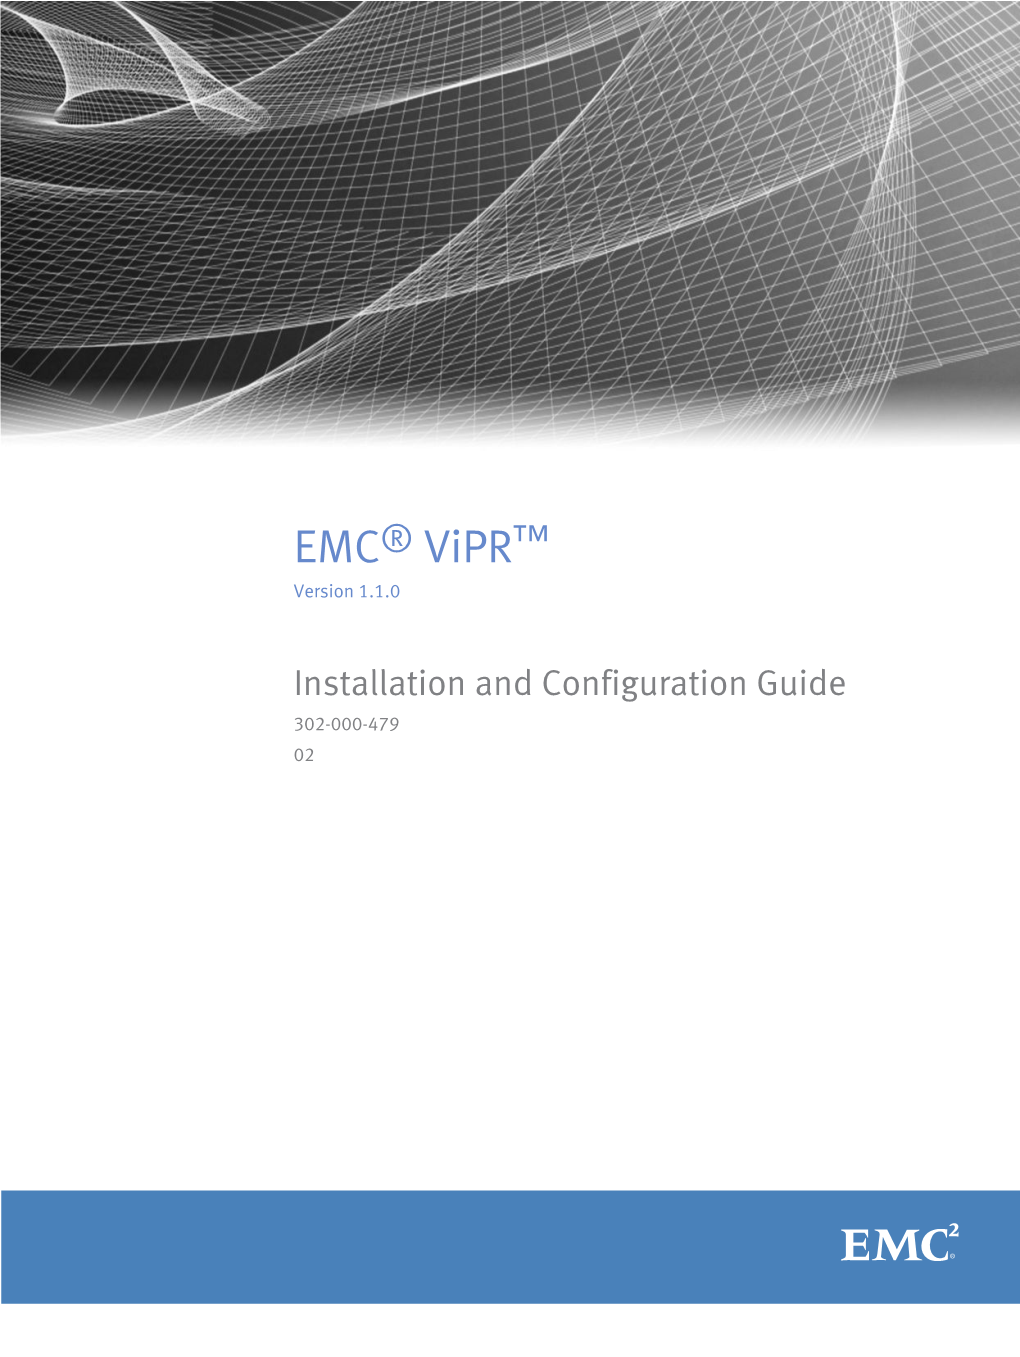 EMC® Vipr™ 1.1.0 Installation and Configuration Guide